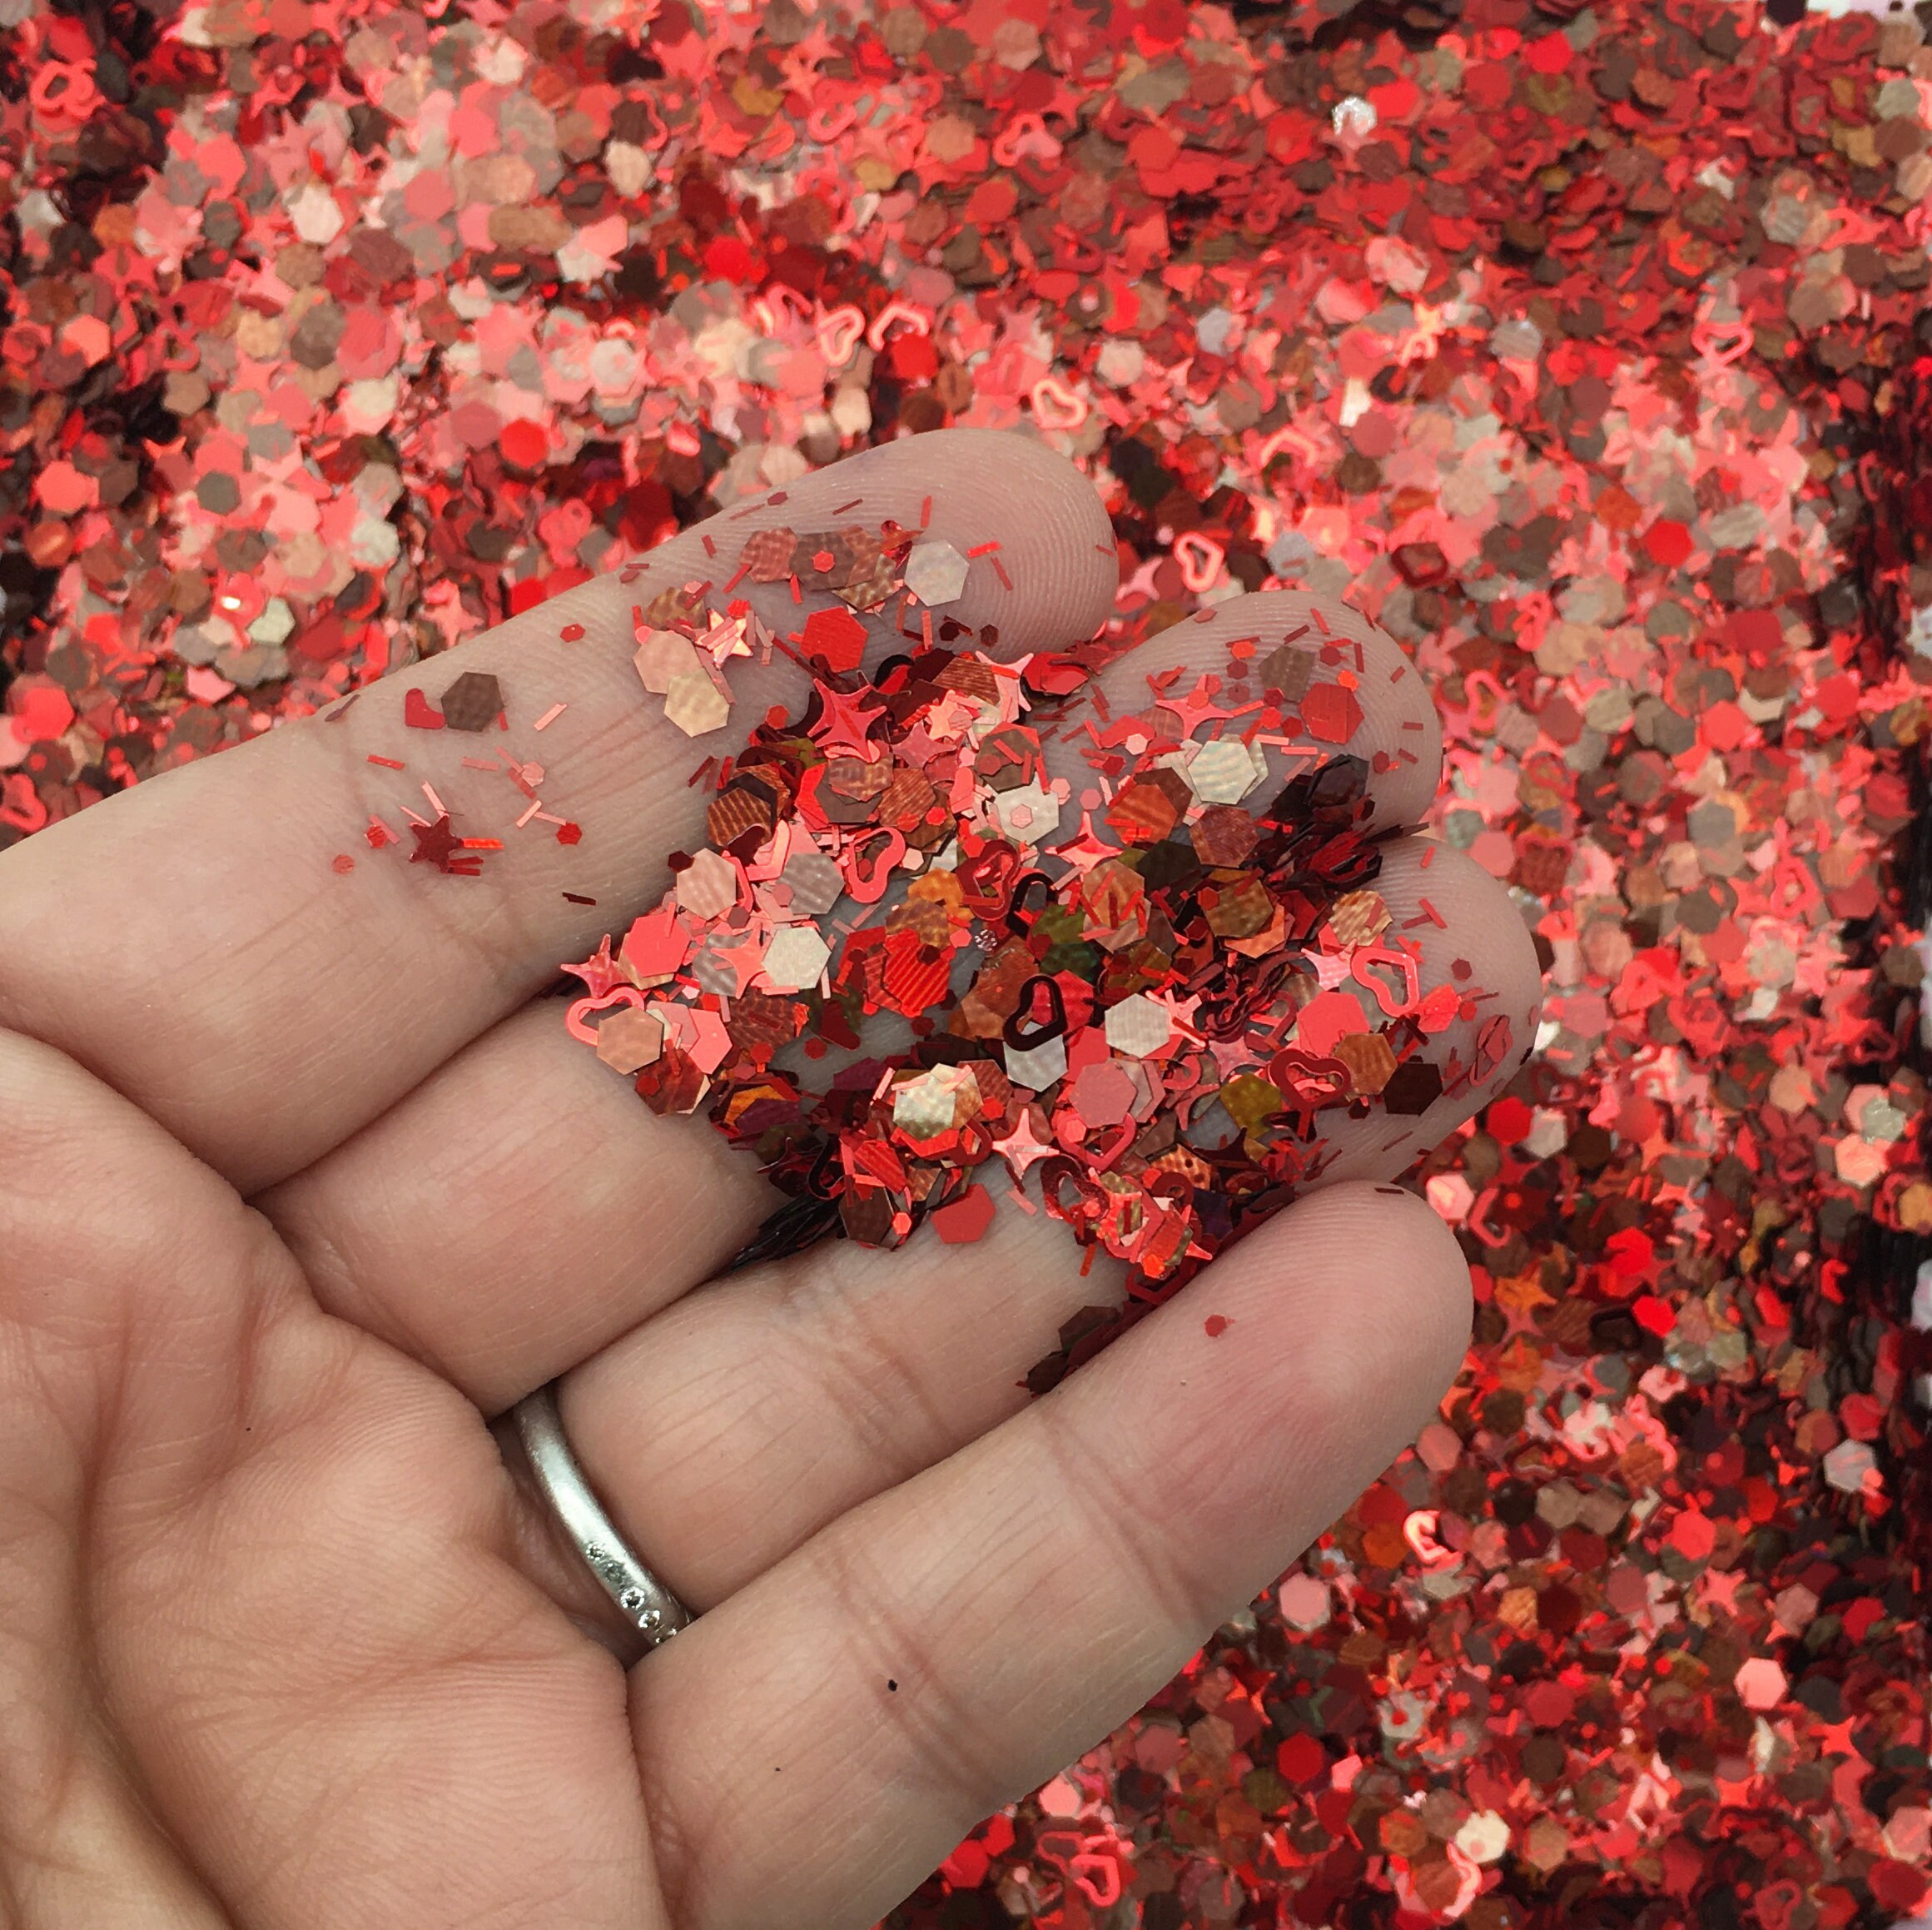 Glitter - Micro Holographic Sets – Wildflowers